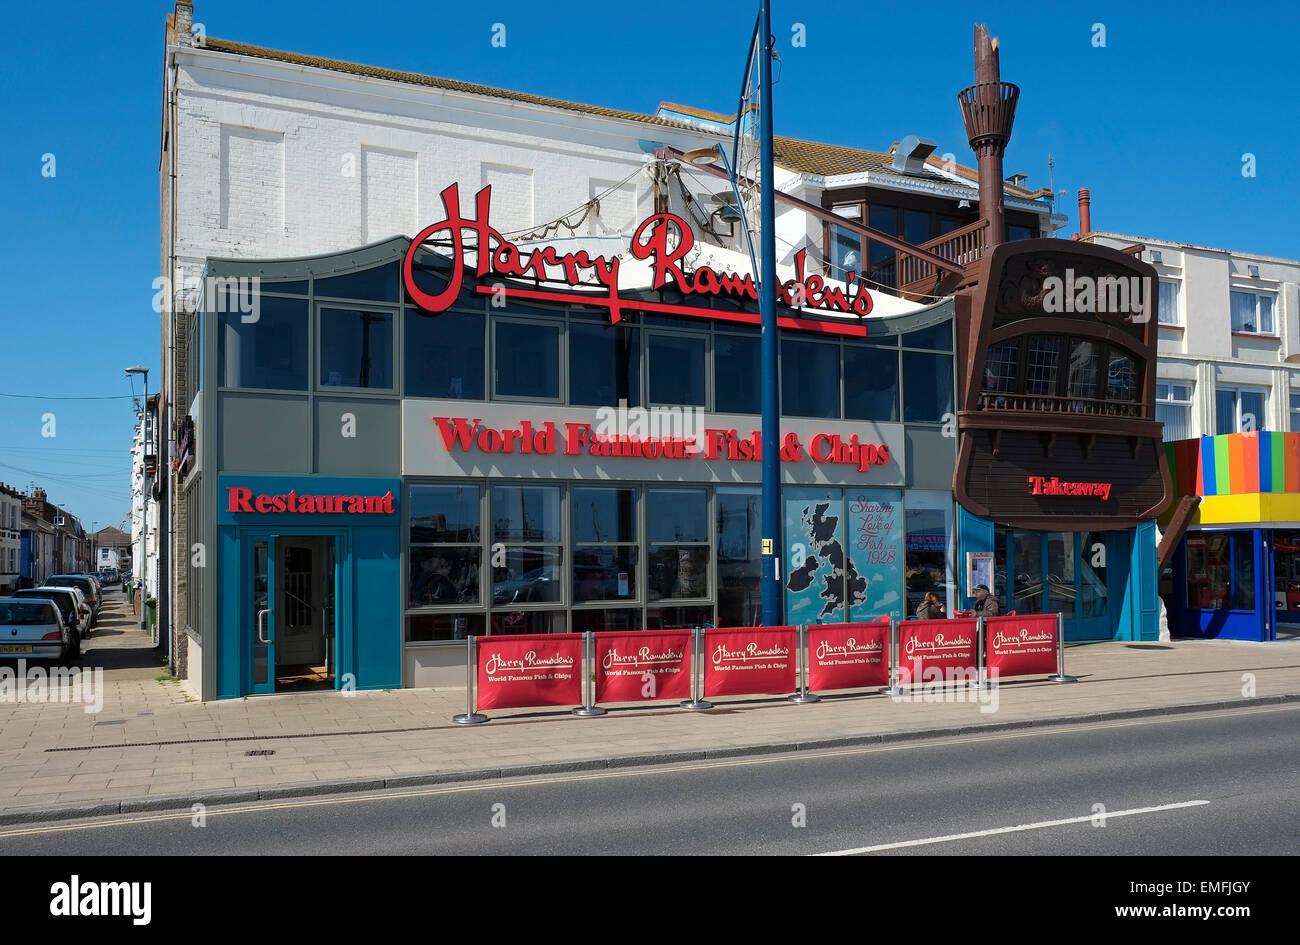 harry ramsden's fish and chips restaurant, great yarmouth, norfolk, england Stock Photo